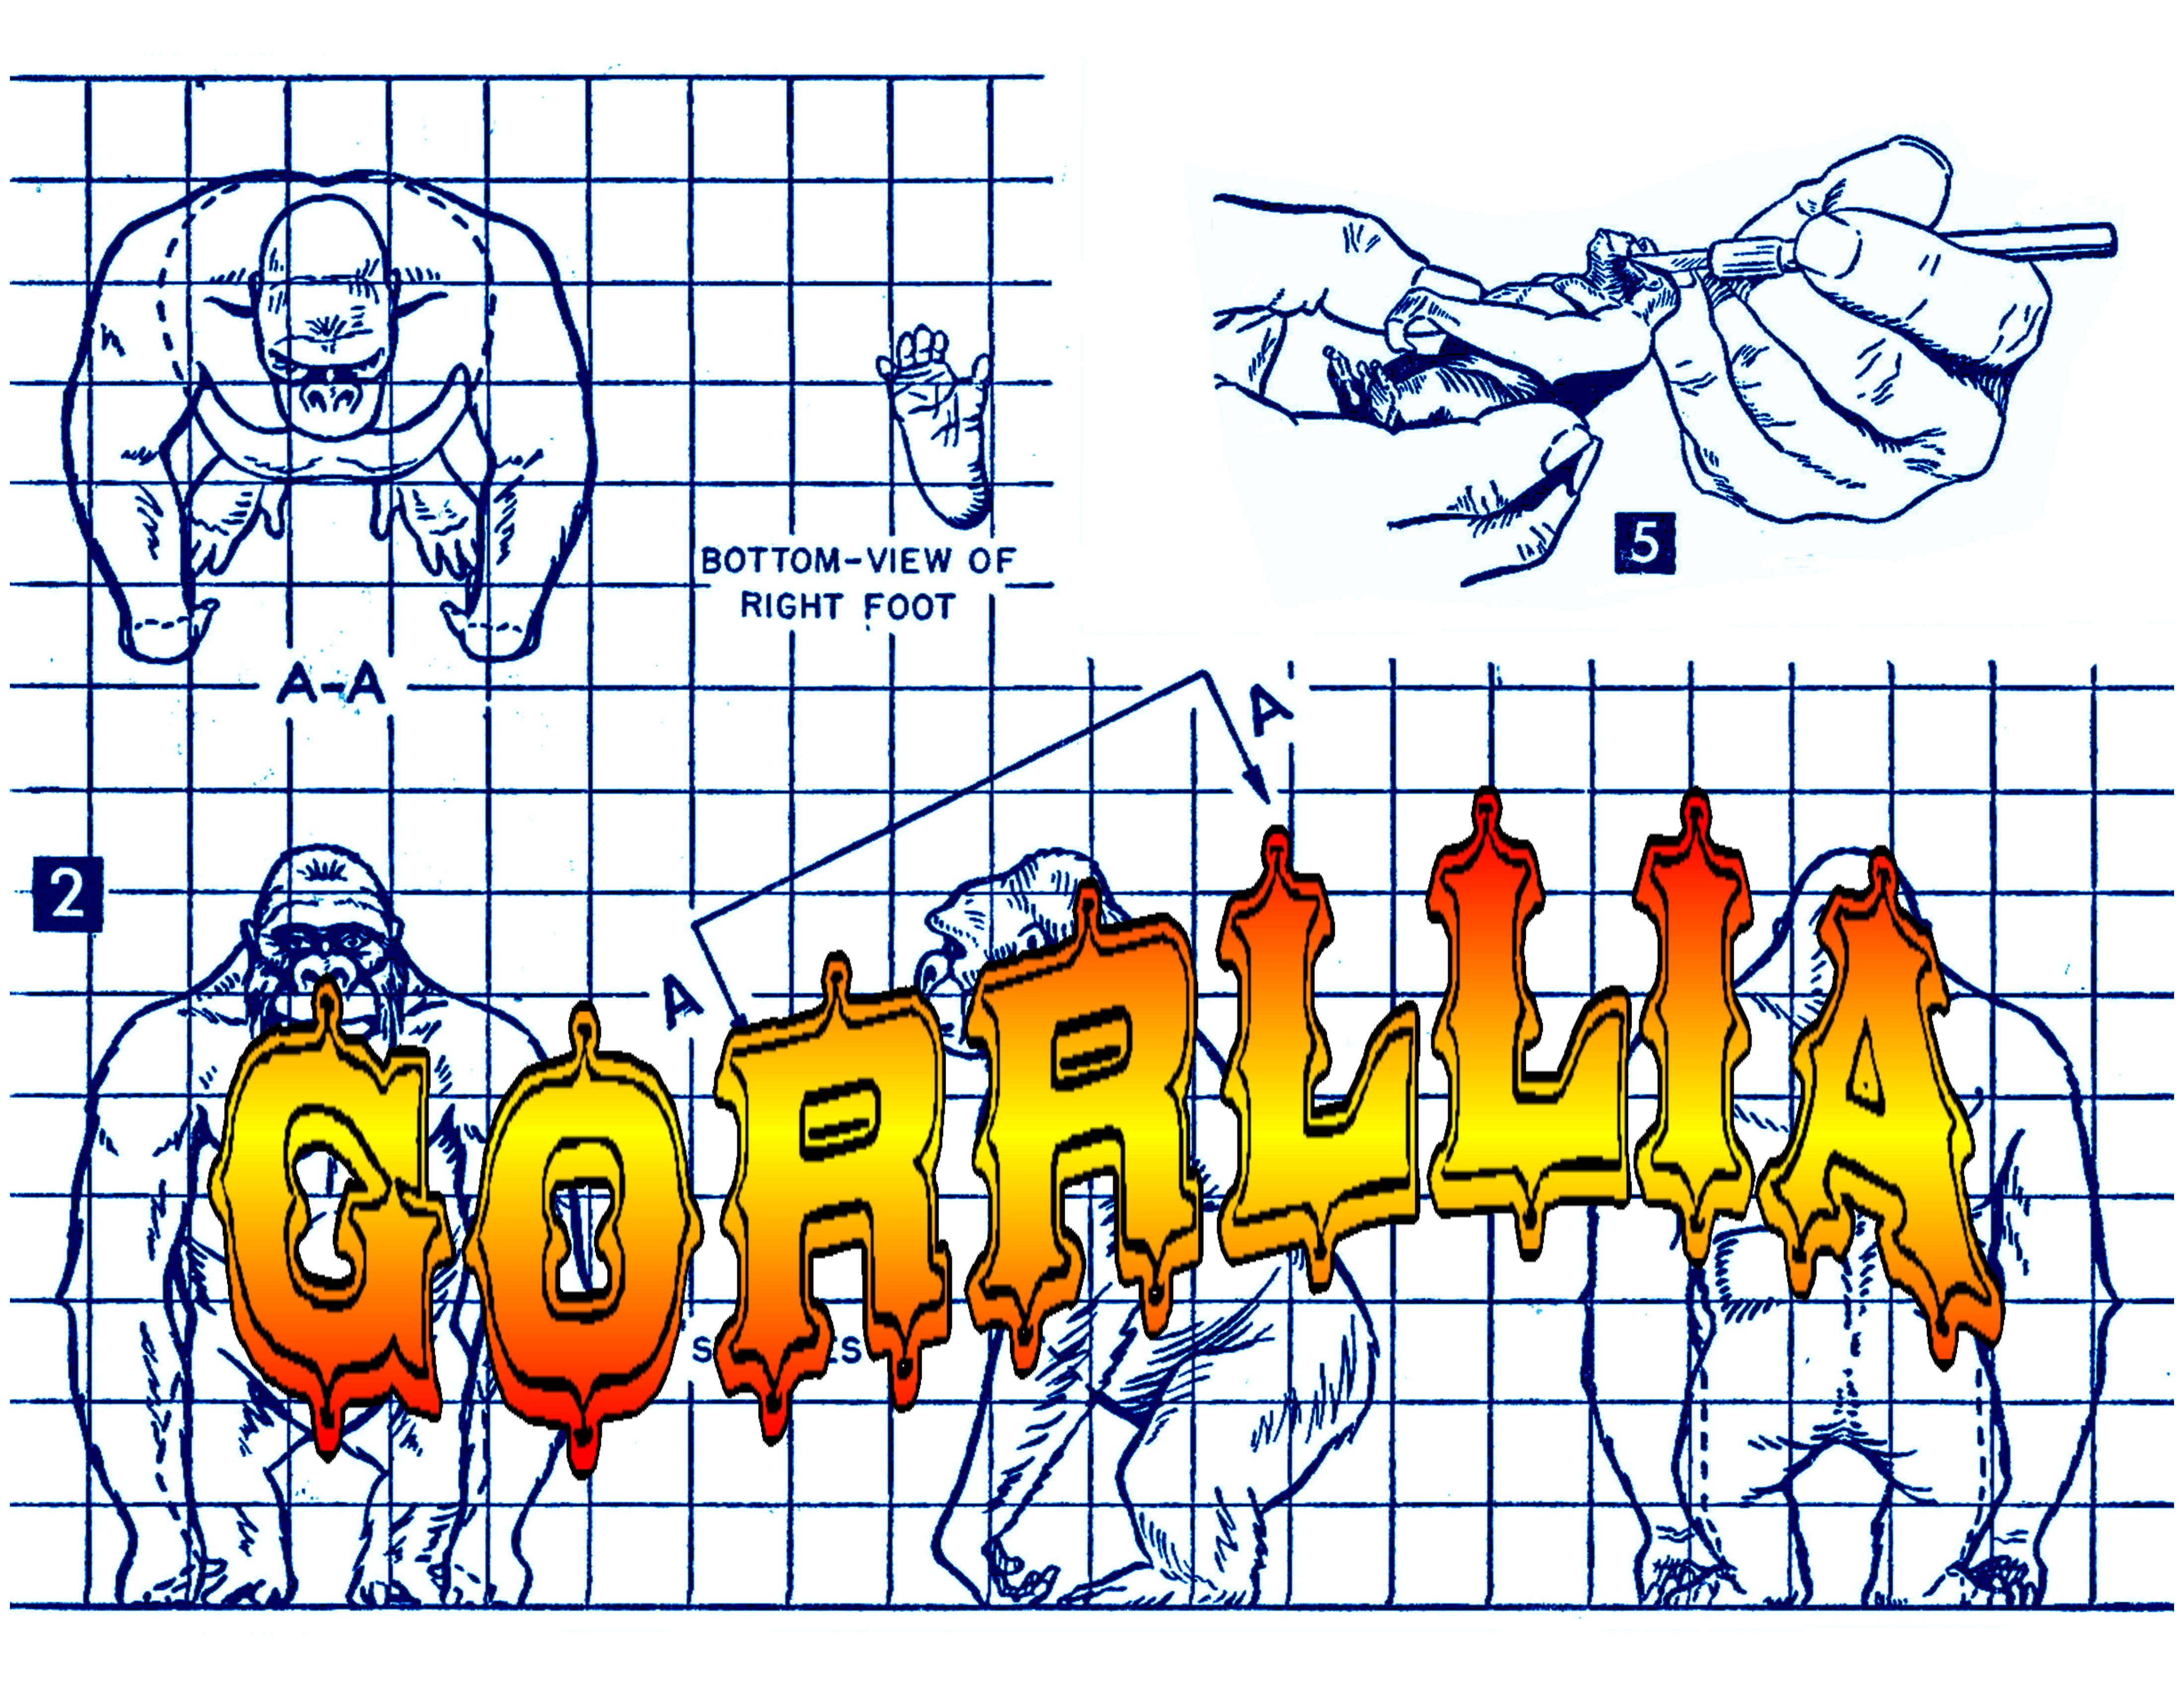 full size printed plans gorilla for your model circus scale 3/4" = 1'  height 3 3/4"  width 2 1/2